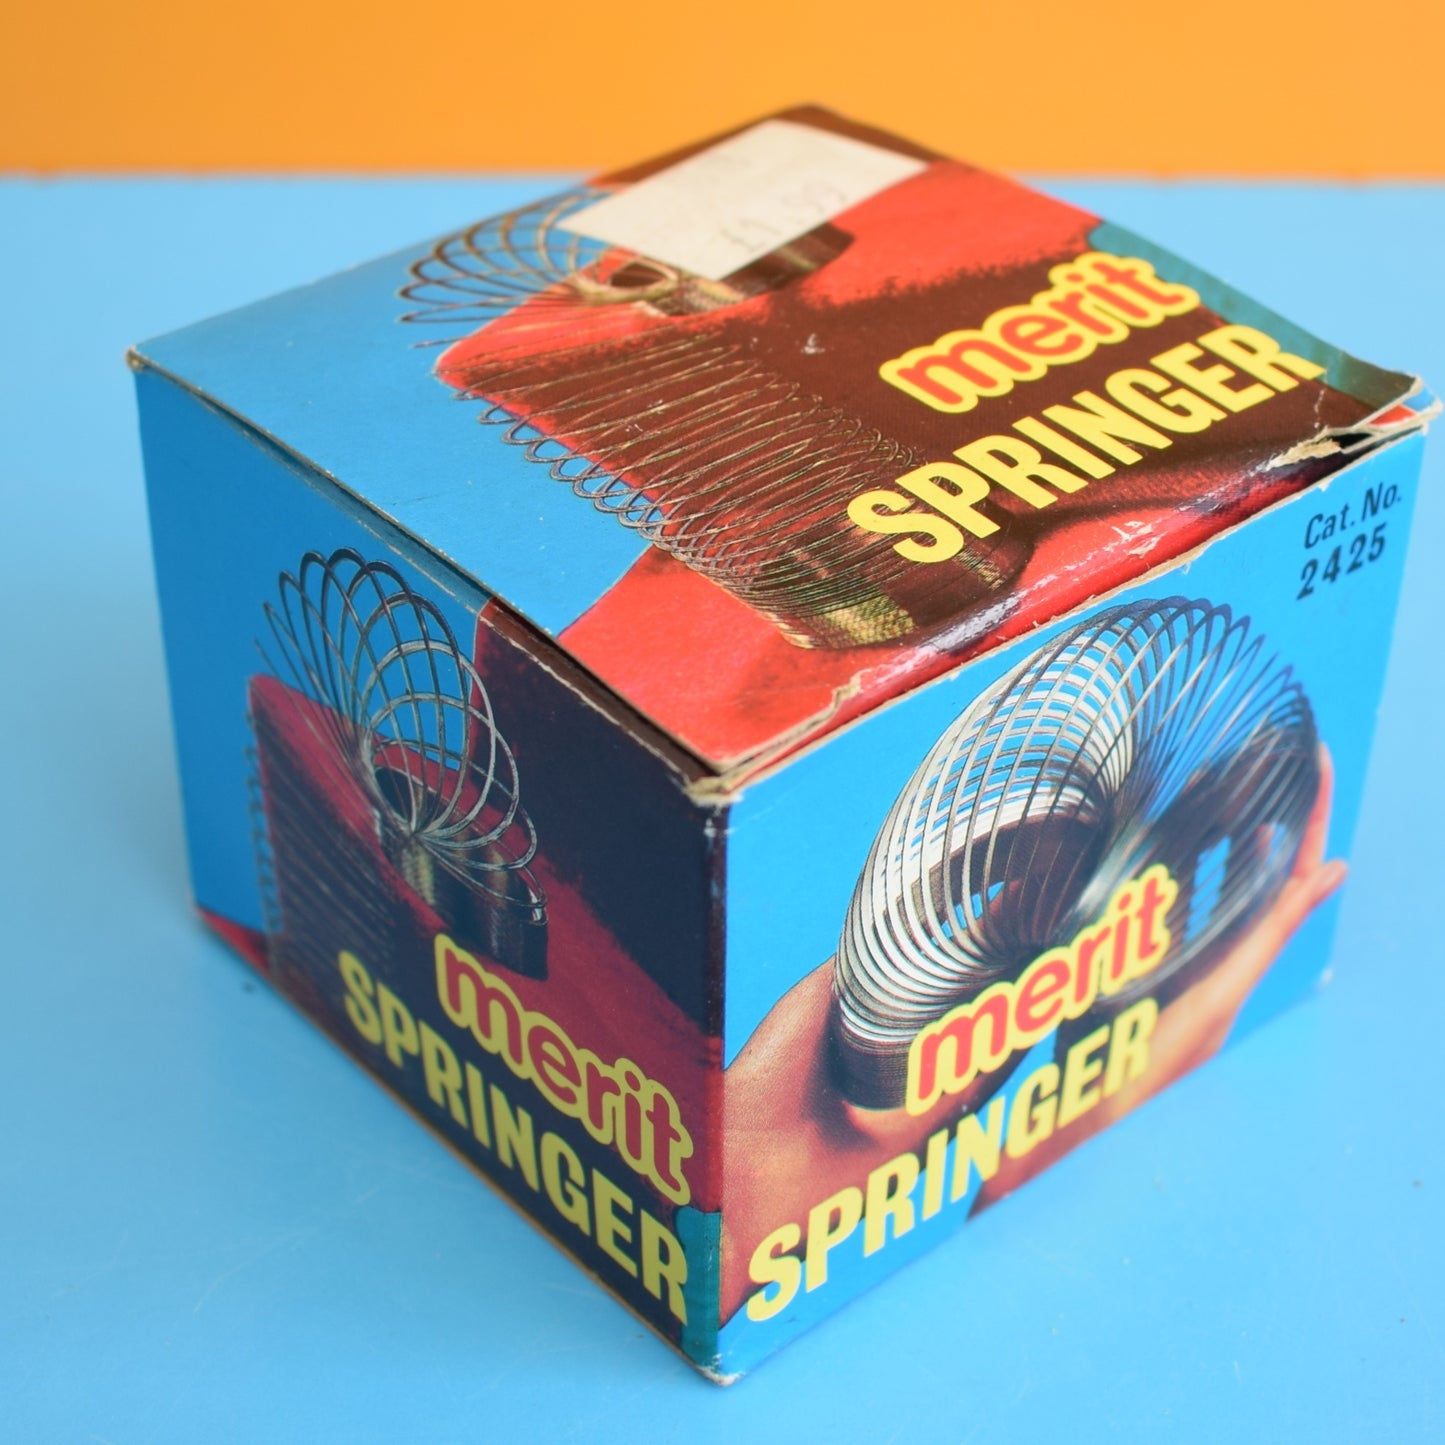 Vintage 1970s Original Slinky Style Toy- Boxed